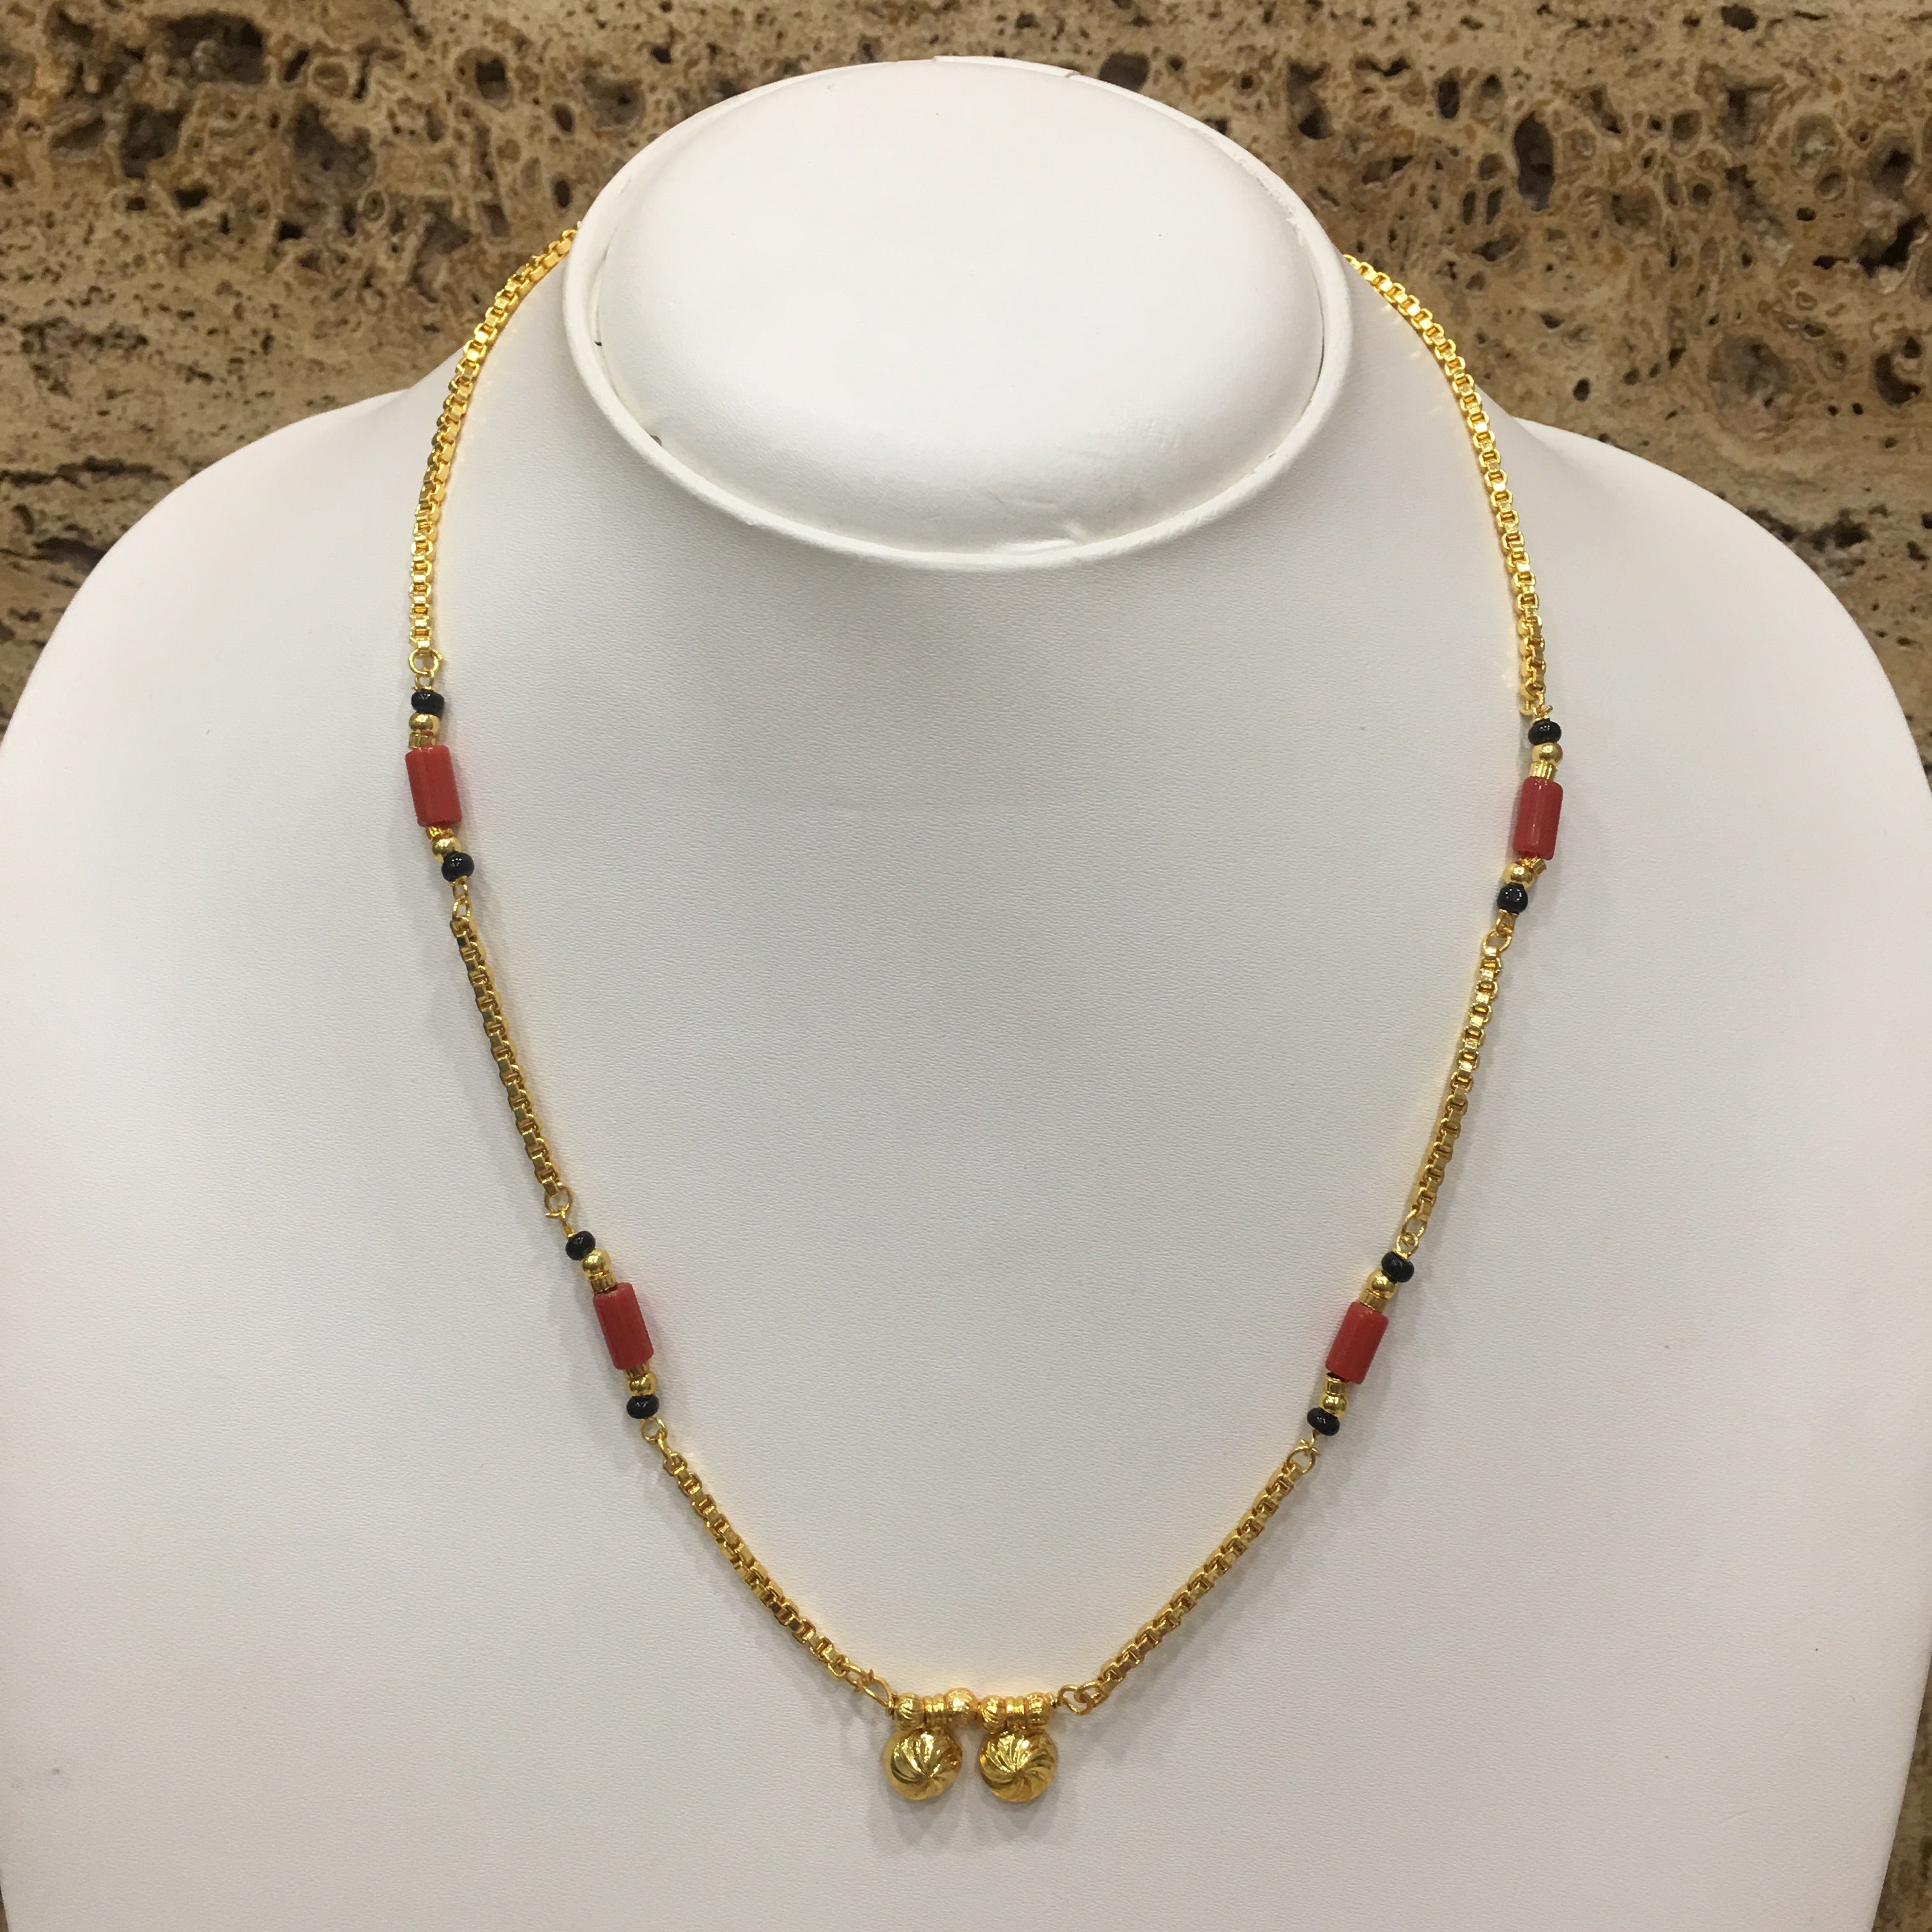 image for Short Mangalsutra Designs Gold Plated Latest 2 Vati Pendant Coral & Black Beads Mangalsutra